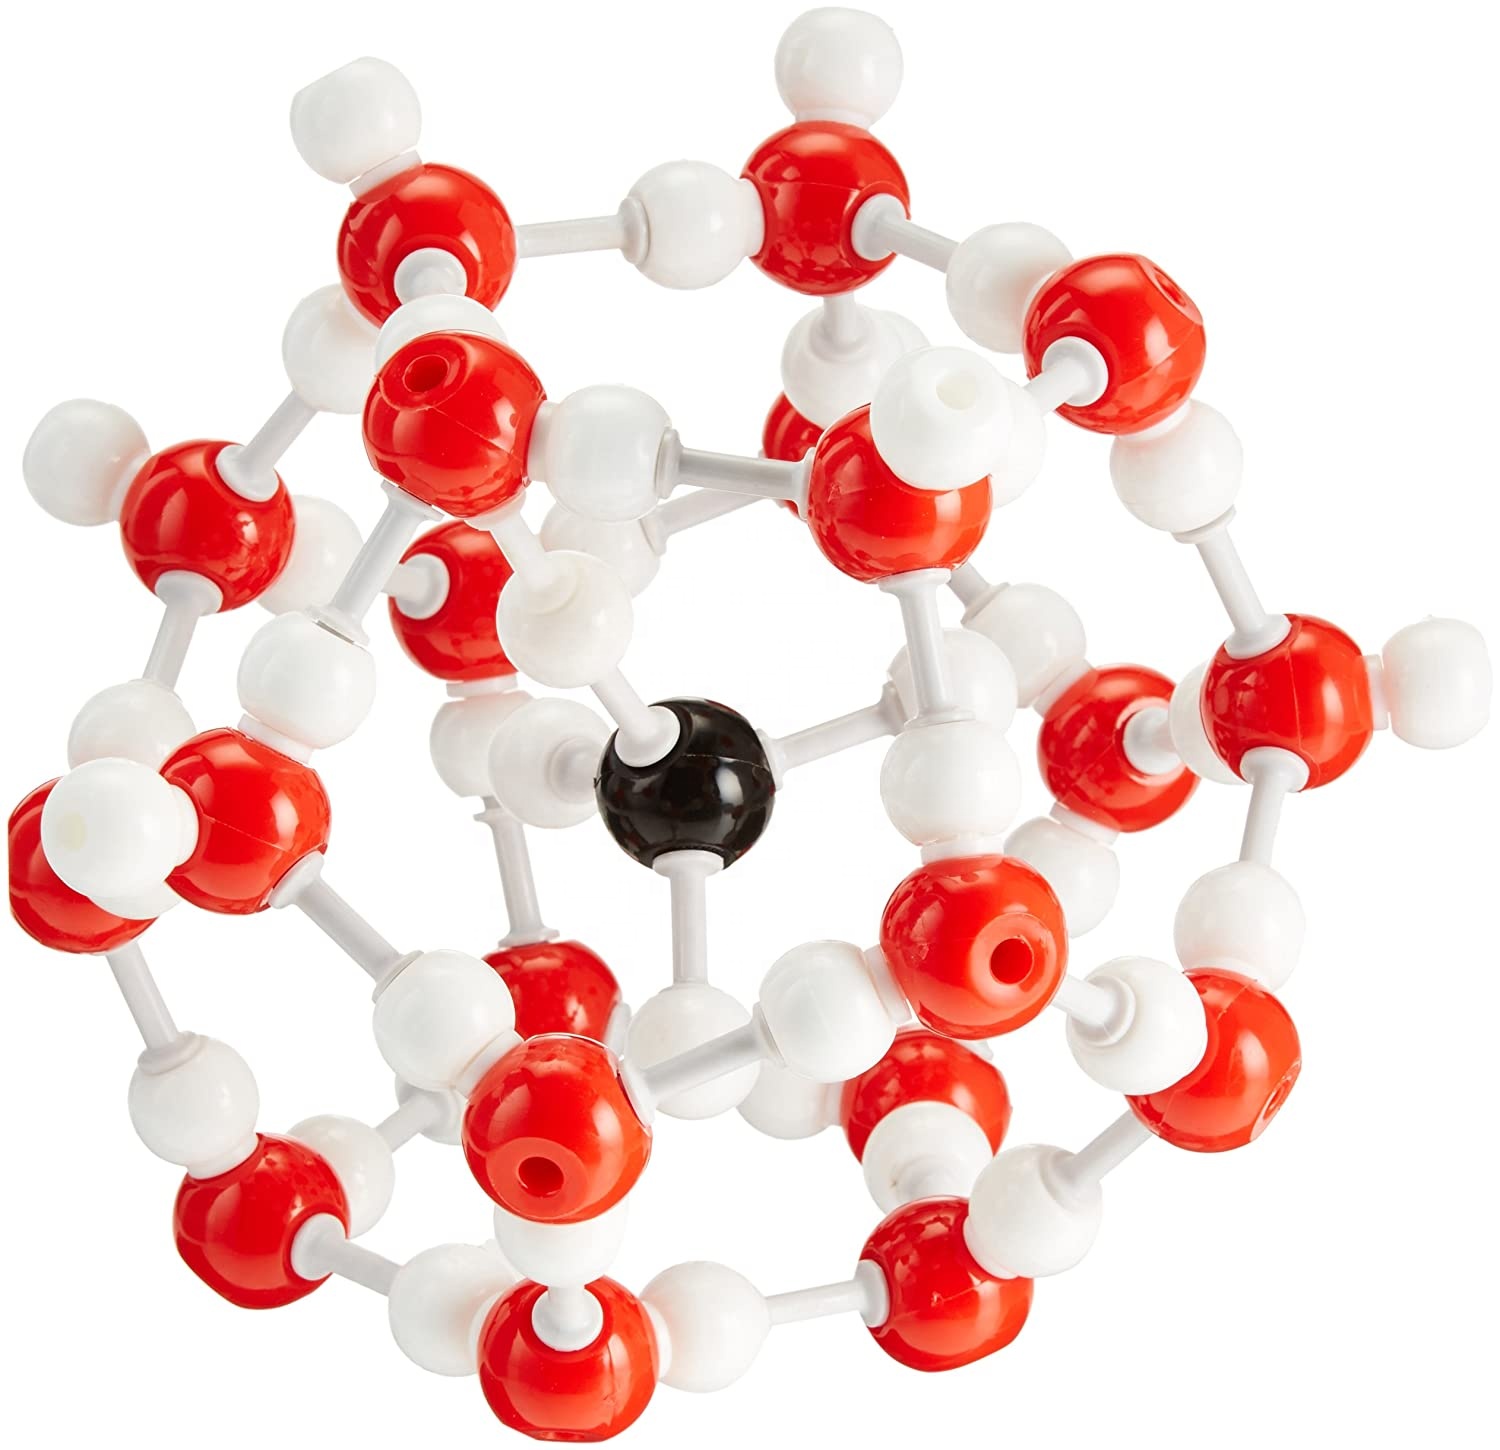 Methane Hydrate Clathrate Molecular Structure Models